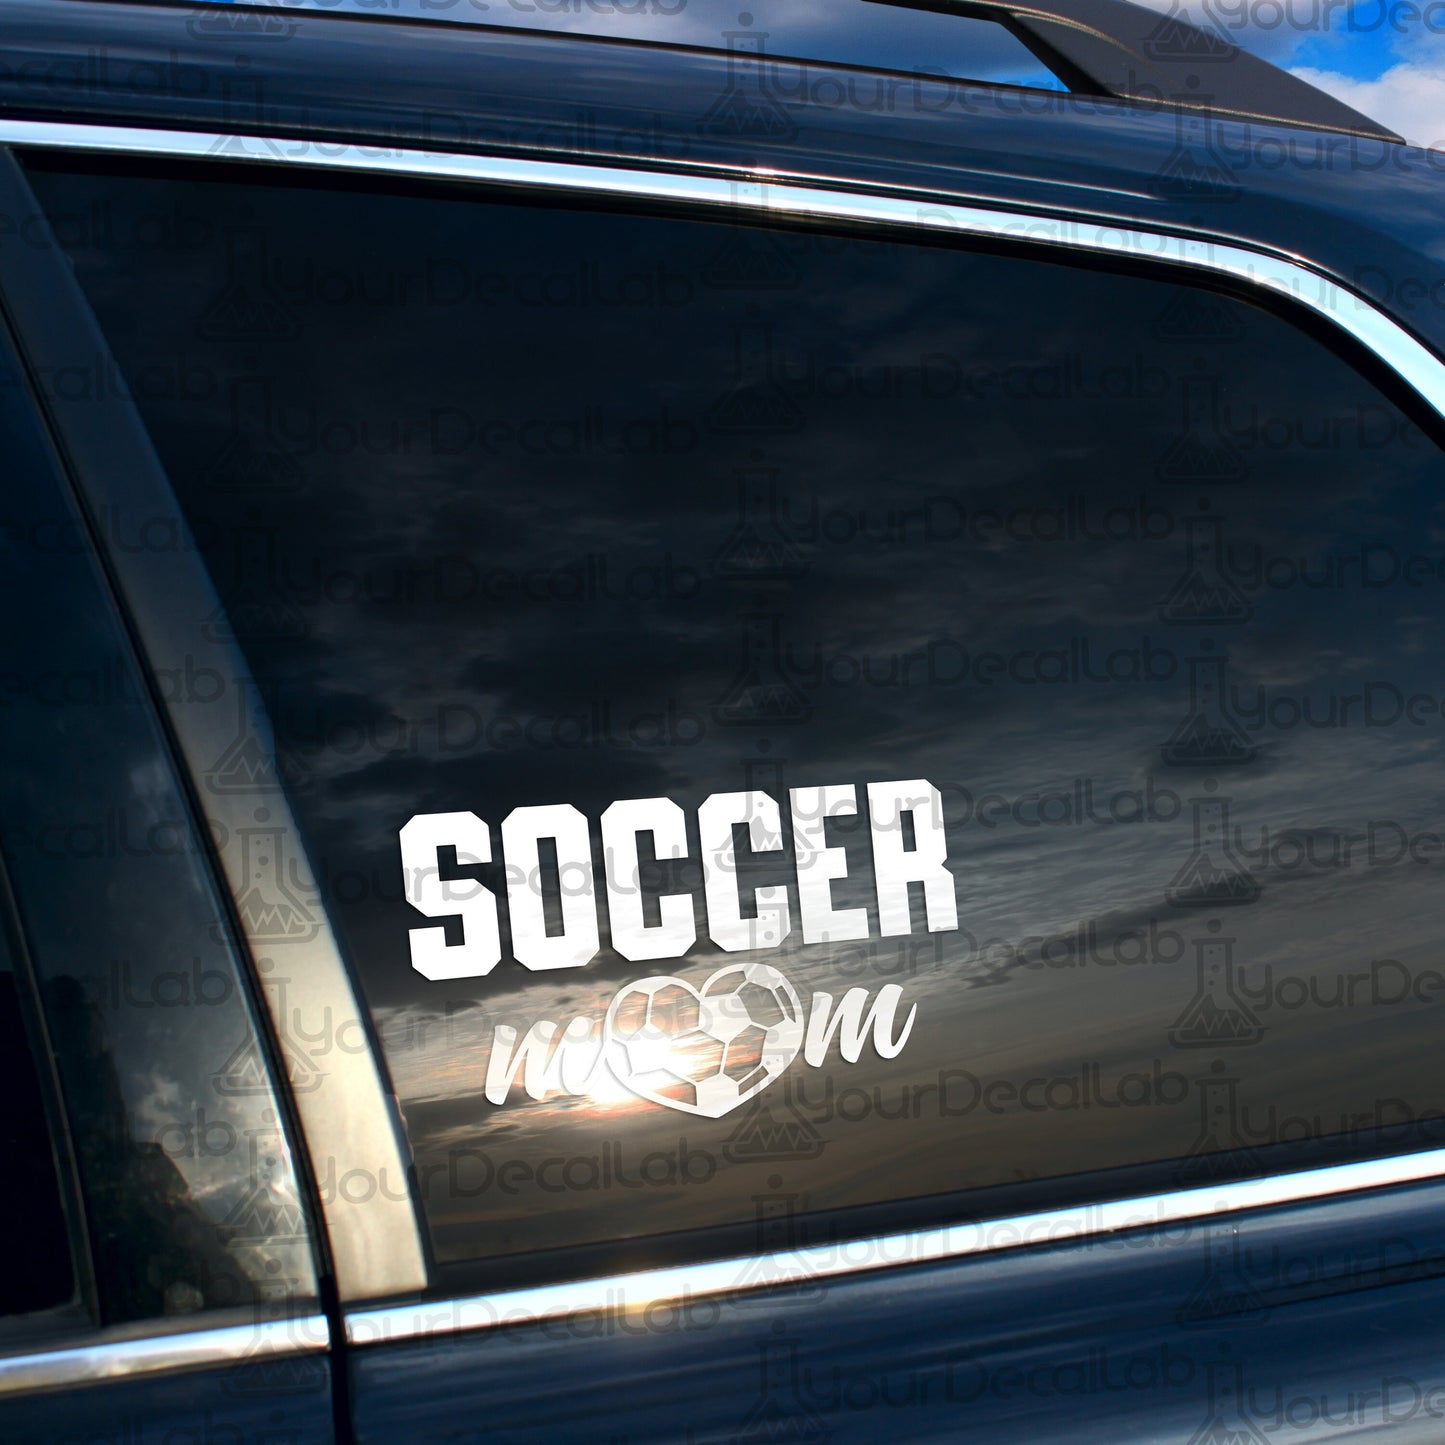 a close up of the side of a car with the word soccer on it